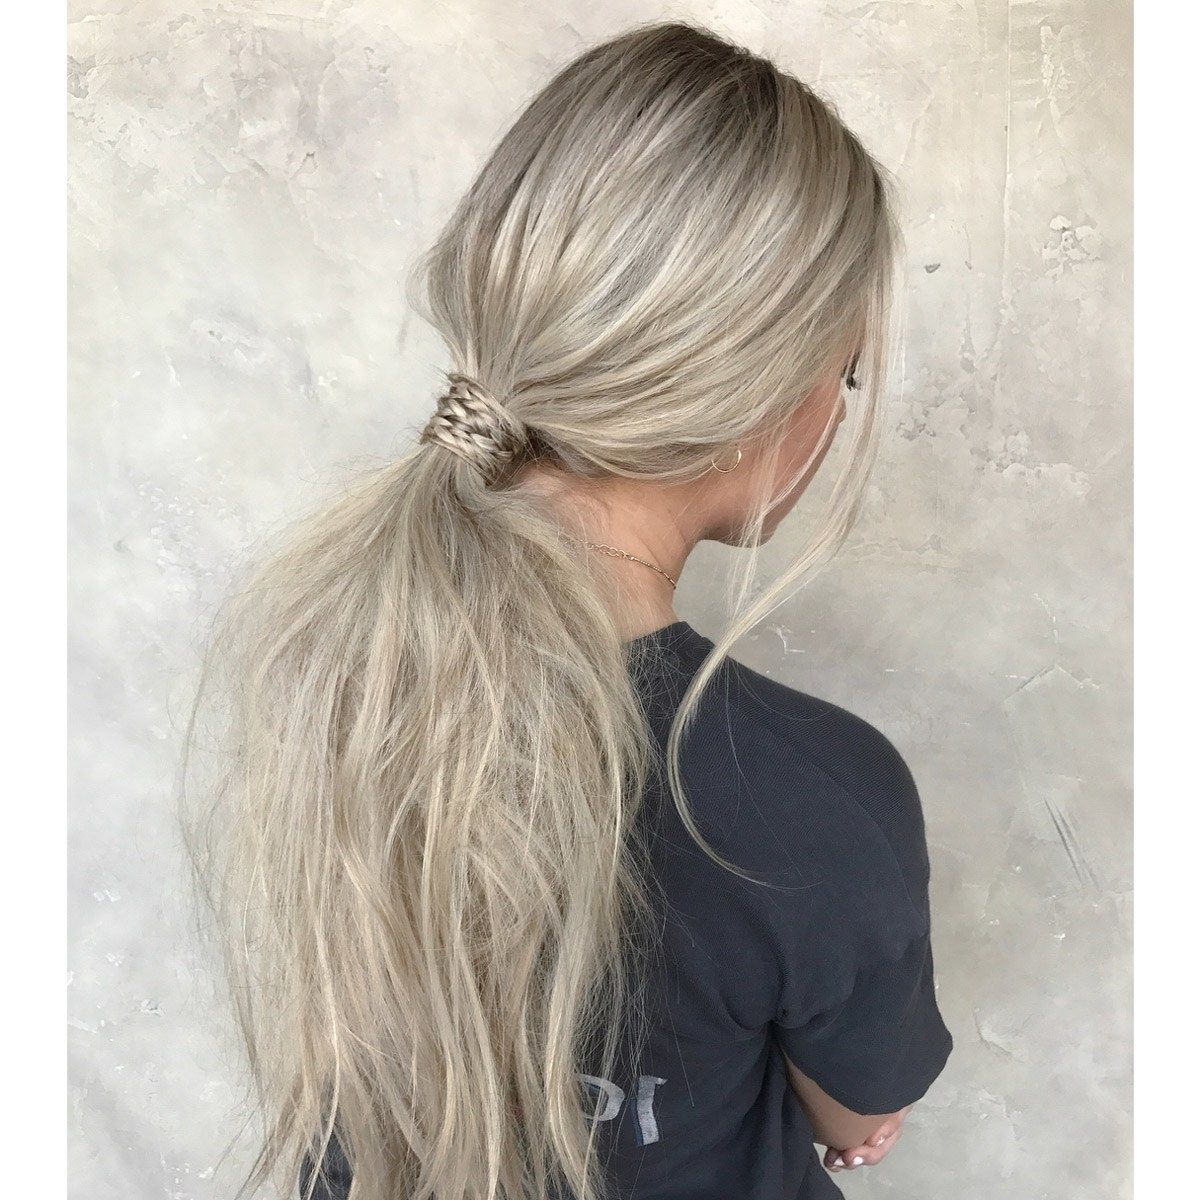 Glamour Intended For Latest Low Hanging Ponytail Hairstyles (View 11 of 20)